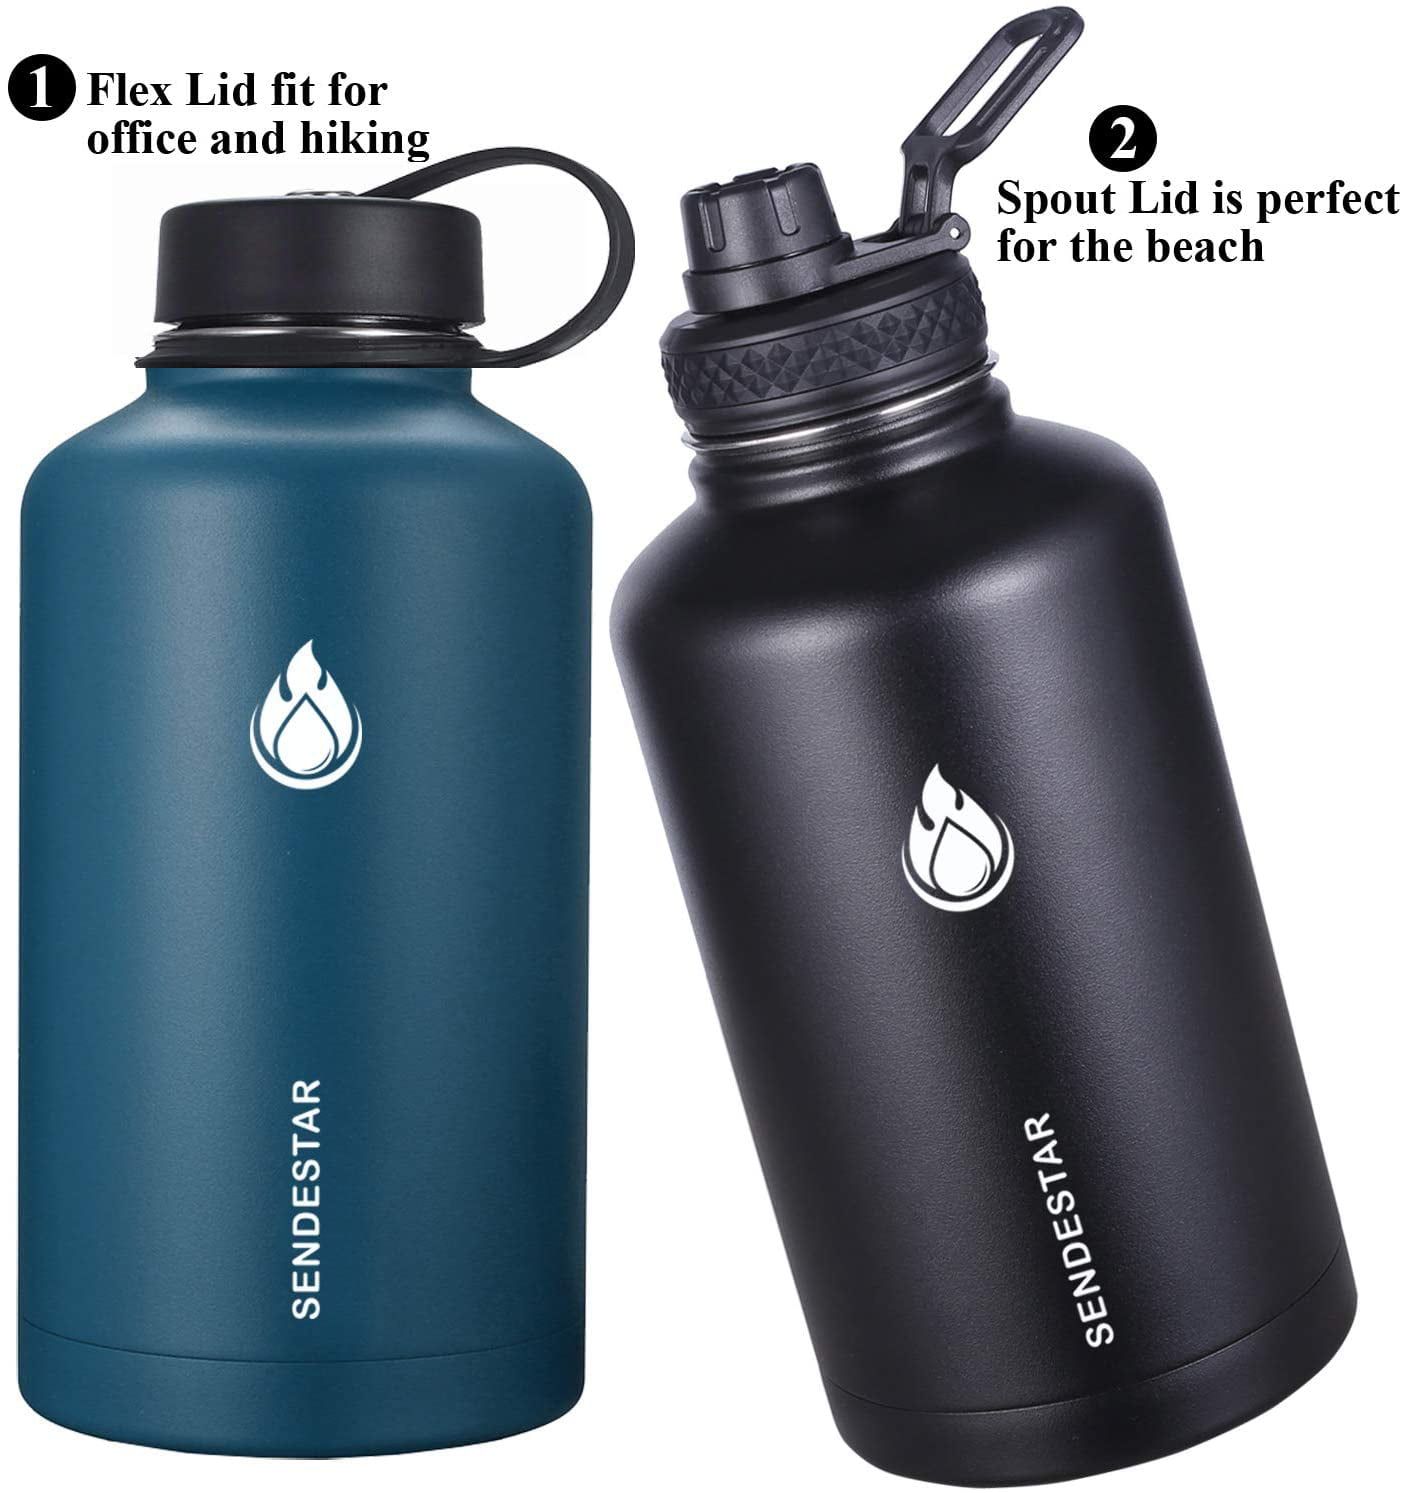 Mint/Cobalt SENDESTAR 64 oz Beer Growler Double Wall Vacuum Insulated Leak Proof Stainless Steel Water Bottle —Wide Mouth with Flat Cap & Spout Lid Includes Water bottle Pouch 